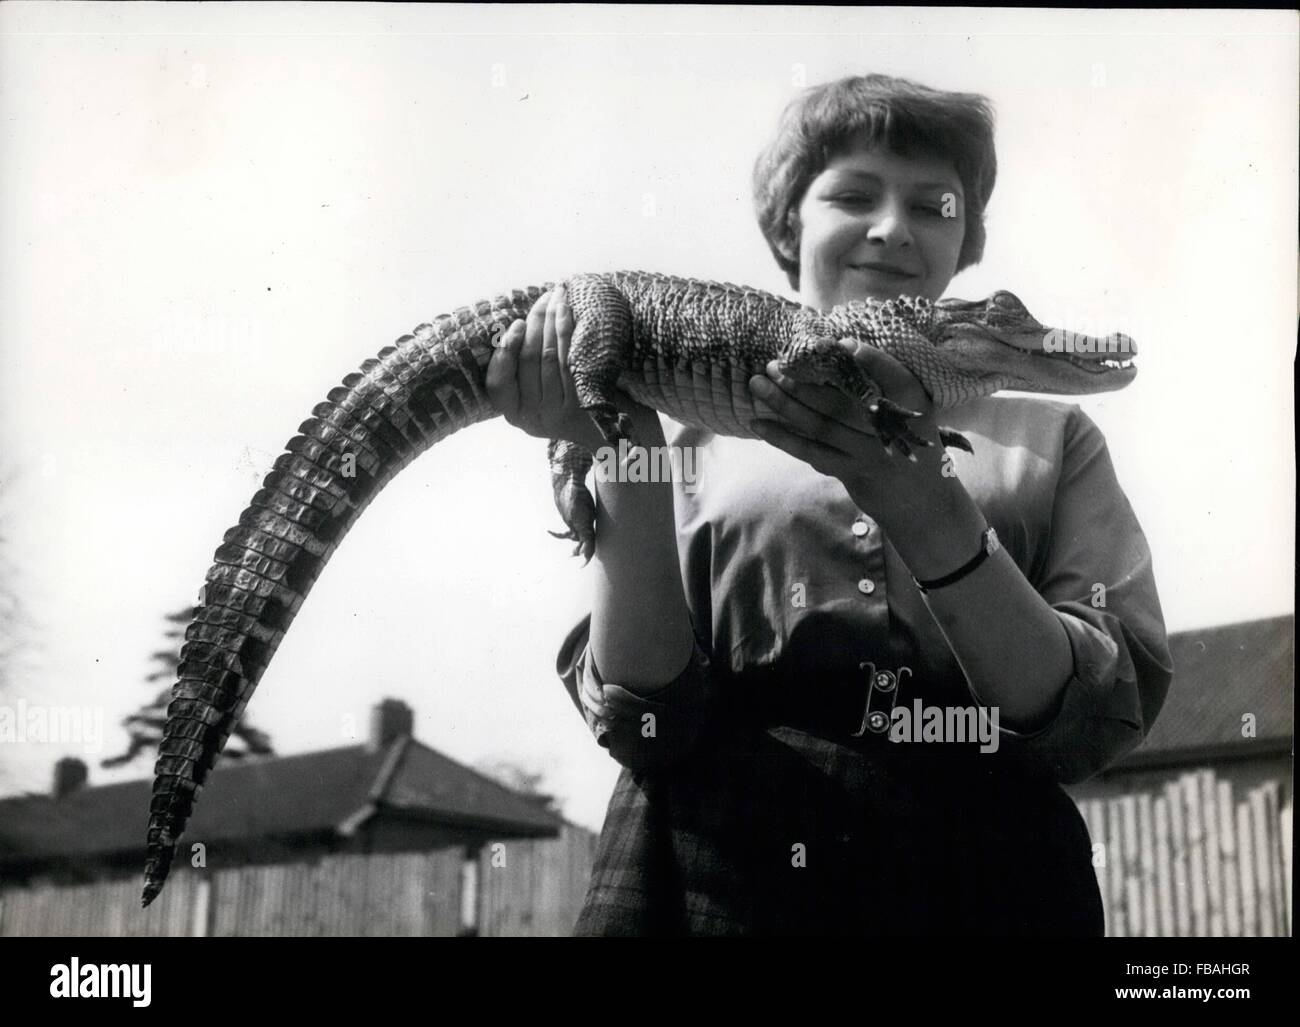 1968 - Meet Mr. Murgatroyd : Anne Kindler is finding her pet alligator, Murgatroyd gets heavier eachg week. Already he's three feet - and -a - bit leng. But he's oh. so tame and friendly, and just loves a tickle on his tummy. © Keystone Pictures USA/ZUMAPRESS.com/Alamy Live News Stock Photo